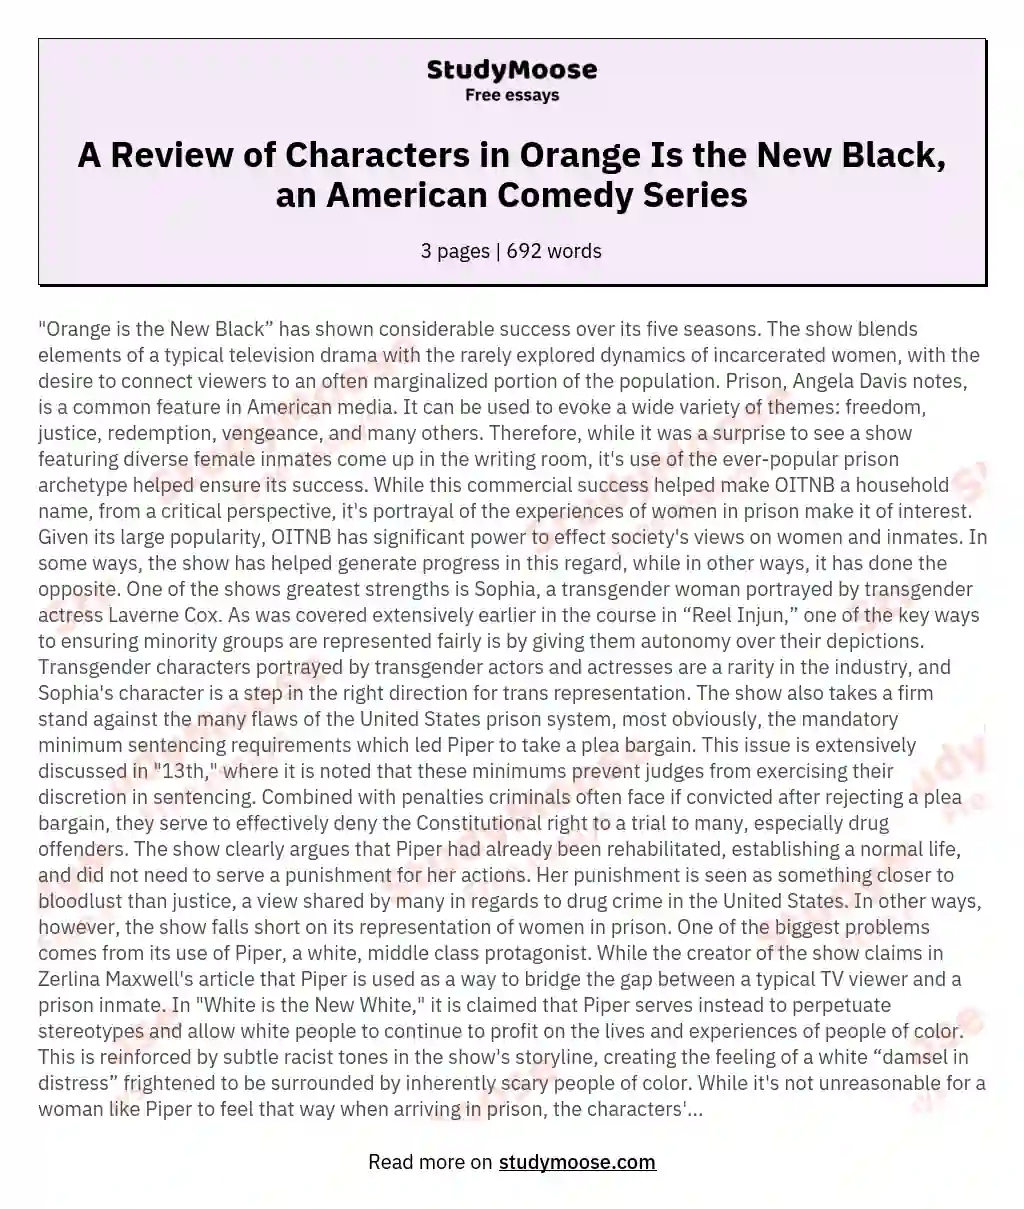 A Review of Characters in Orange Is the New Black, an American Comedy Series essay